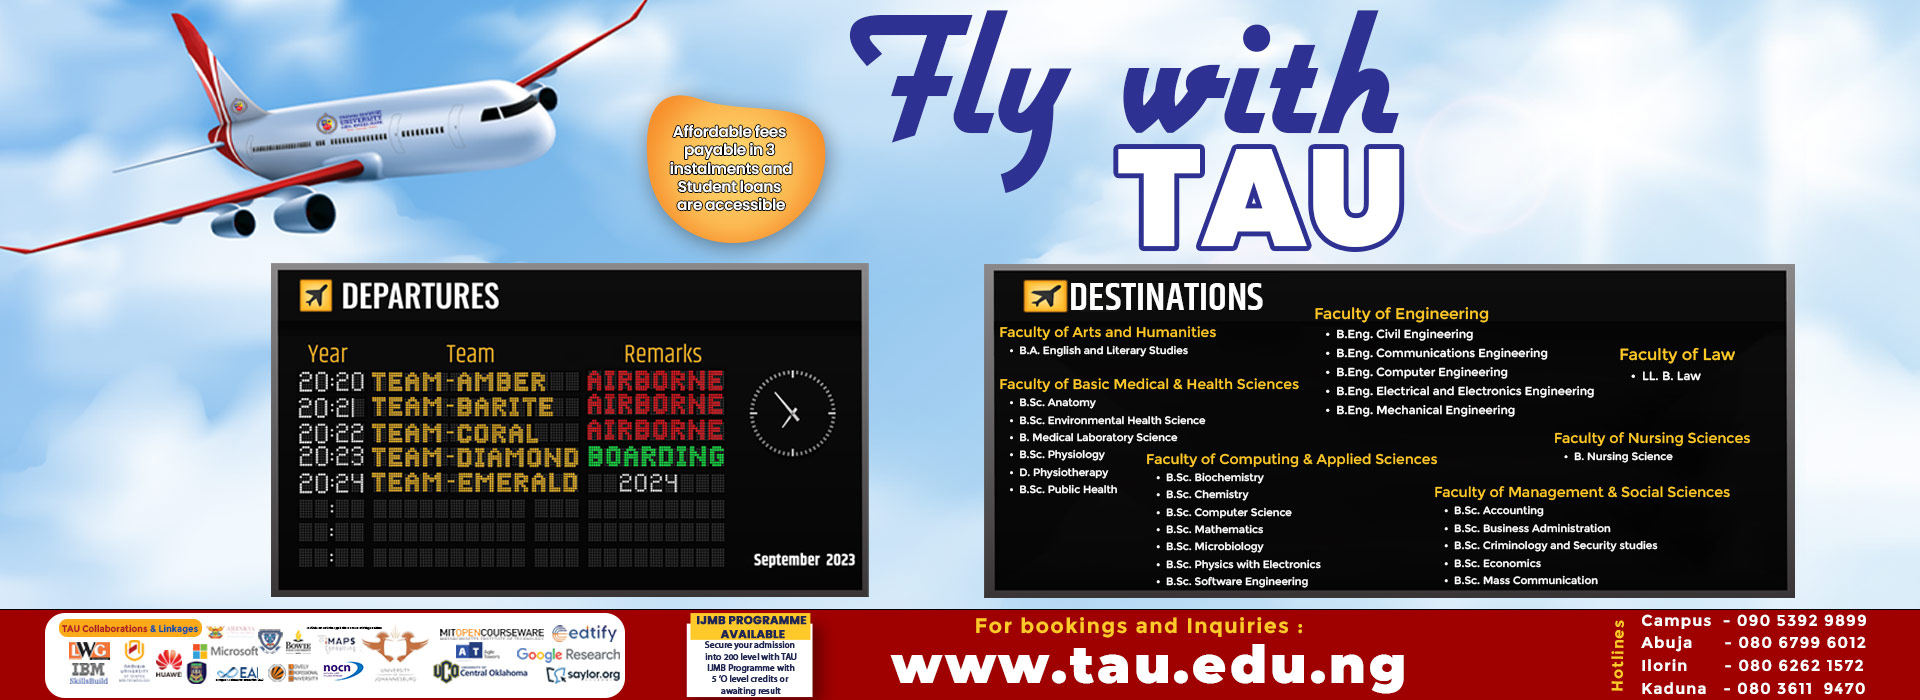 Fly with TAU